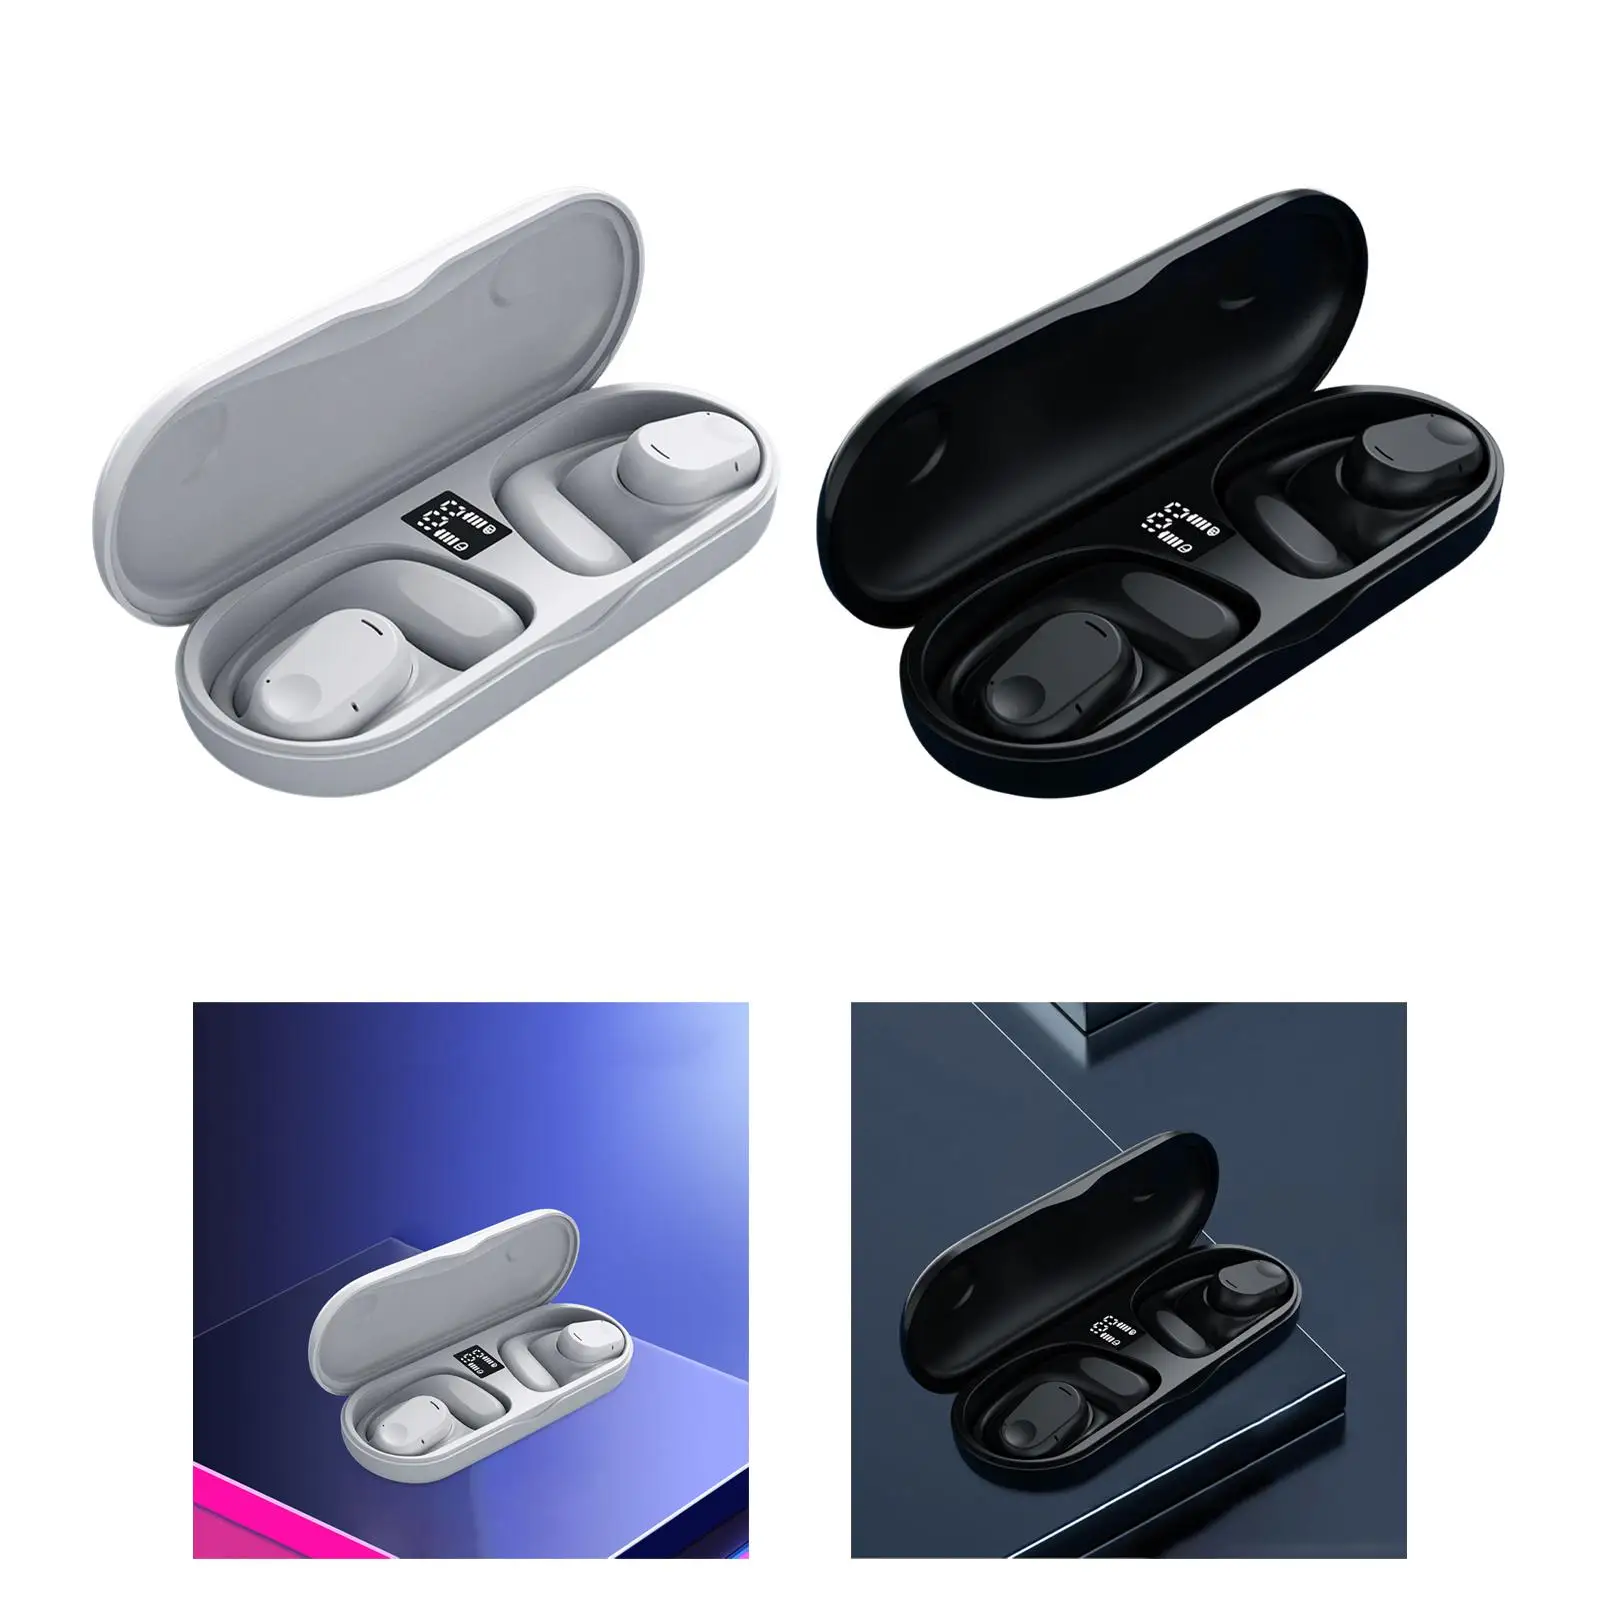 Wireless Earphones Noise Canceling Built in Microphone Sport Earbuds for Driving Business